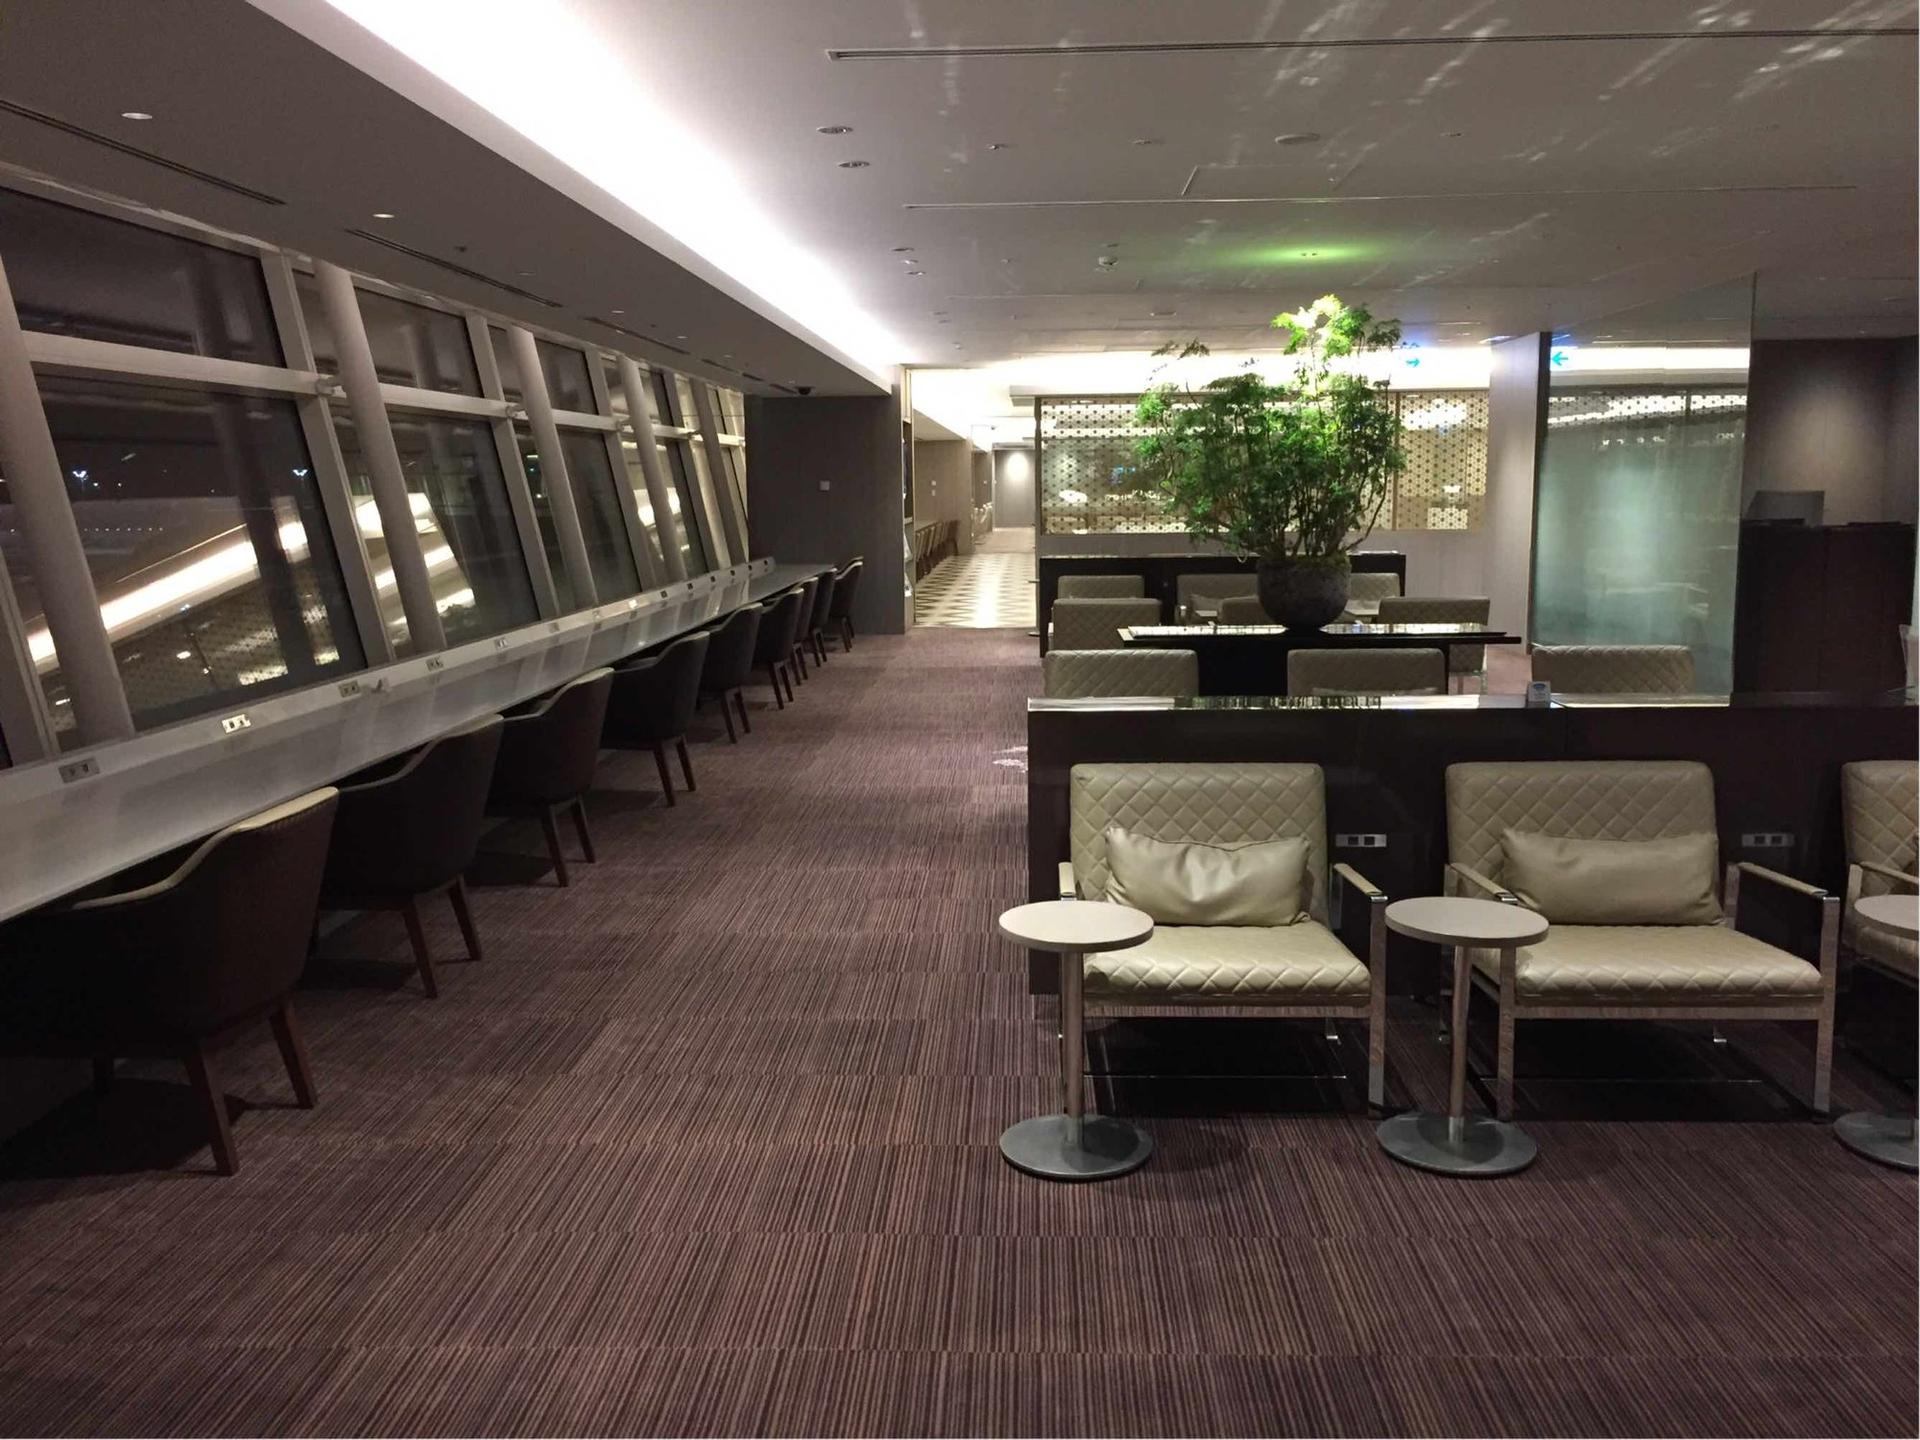 Japan Airlines JAL First Class Lounge image 36 of 43